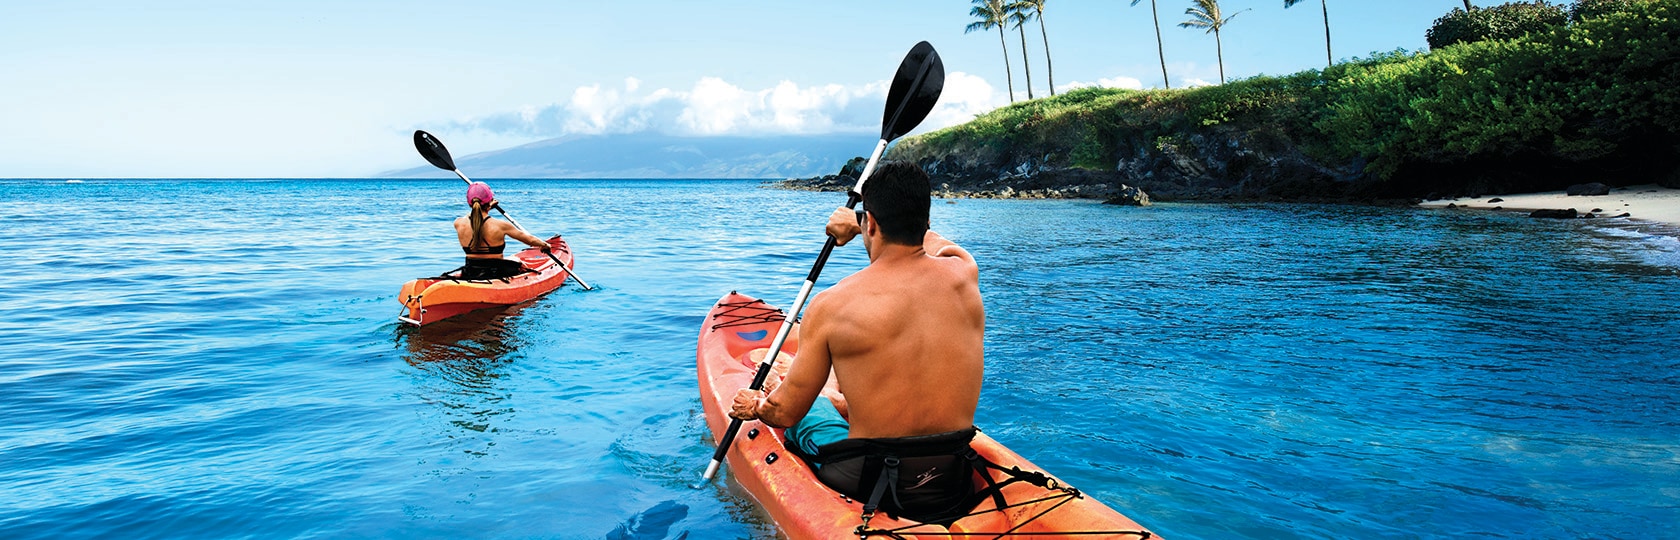 two people kayaking along side the ocean shore with palm trees